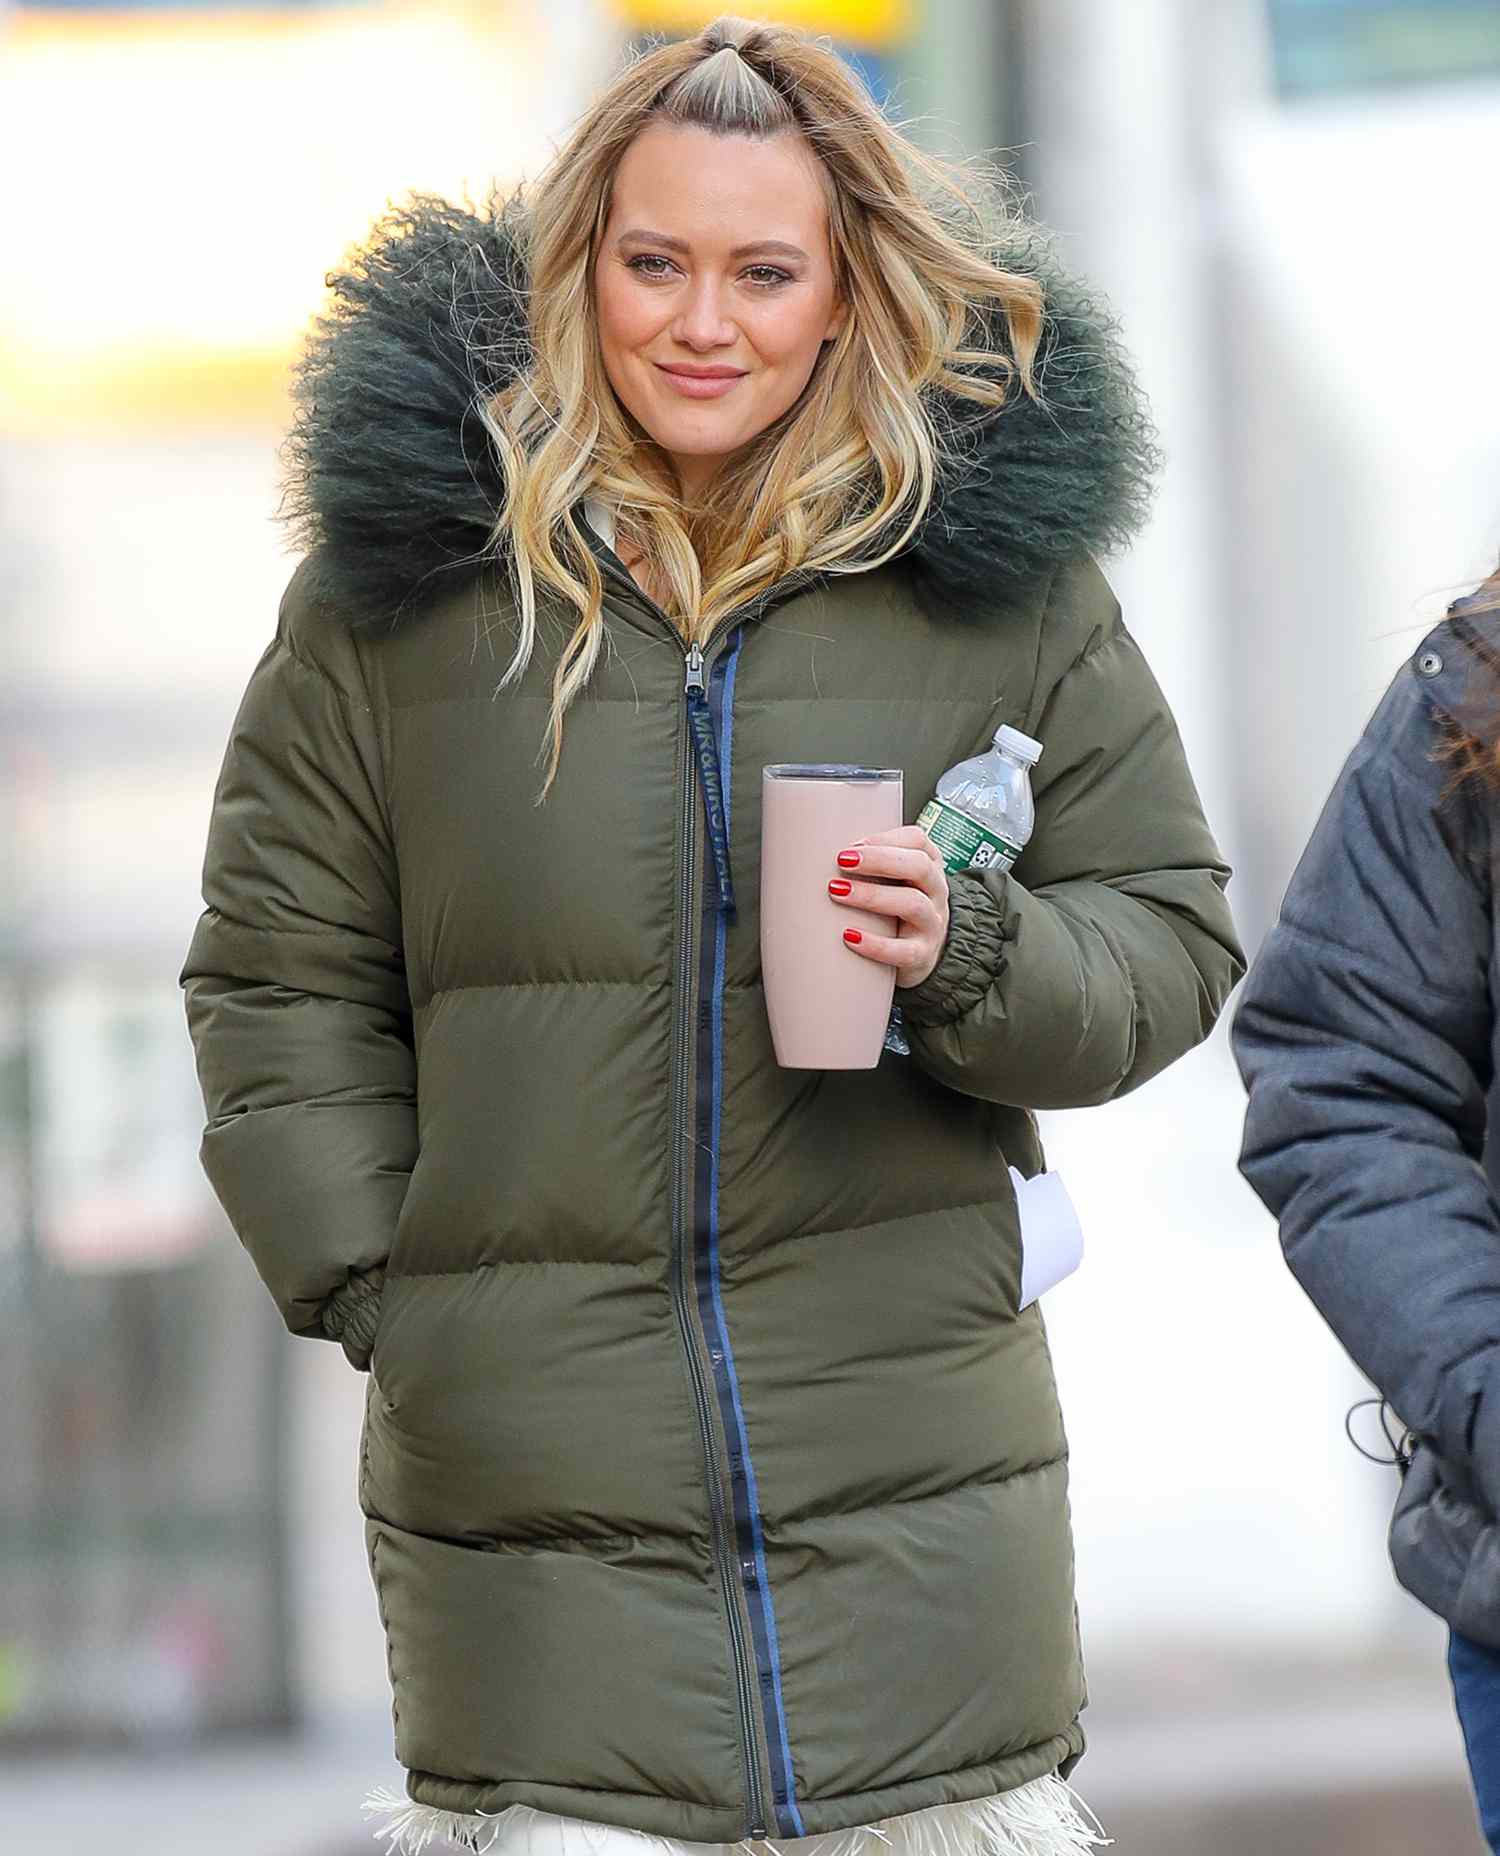 Hilary Duff is all smiling as walking to the 'Younger' set in the west village, New York City